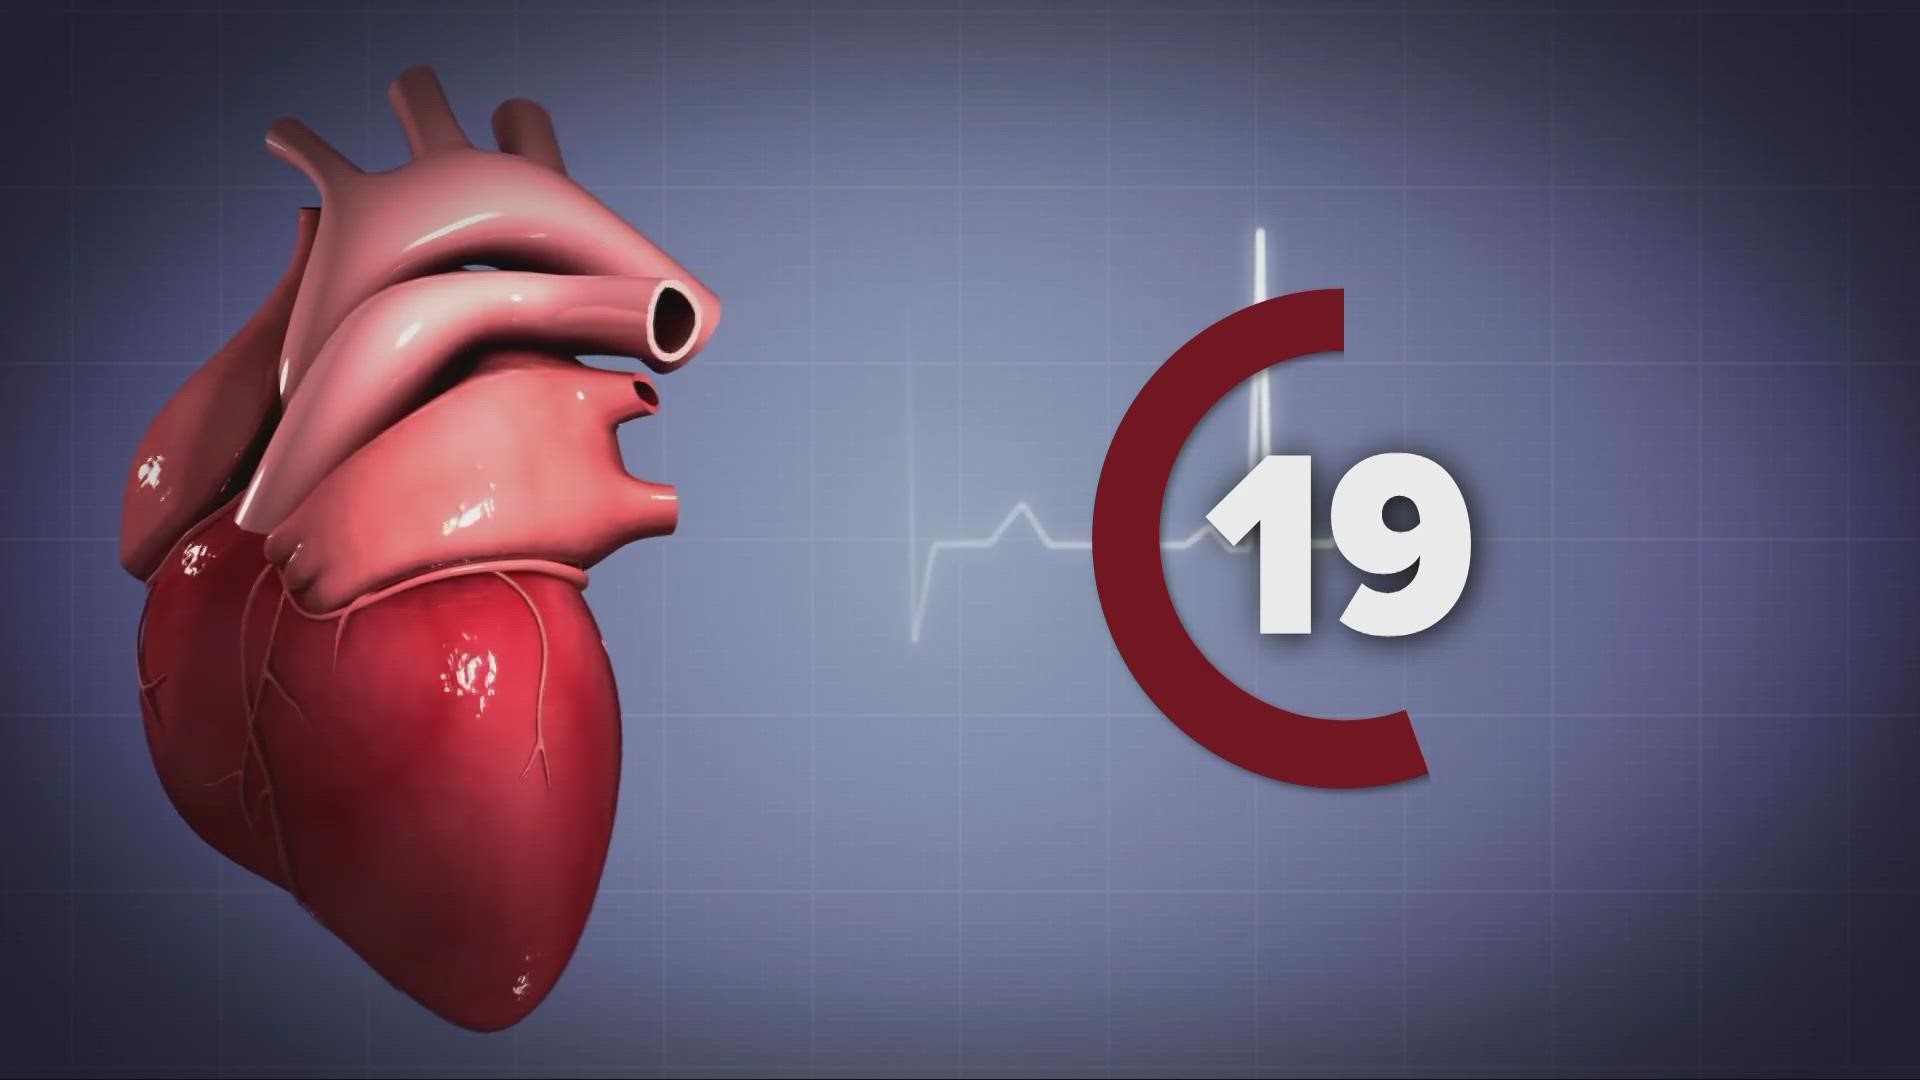 In today's Wellness Wednesday report, we are talking about our hearts.  February kicks off American Heart Month.